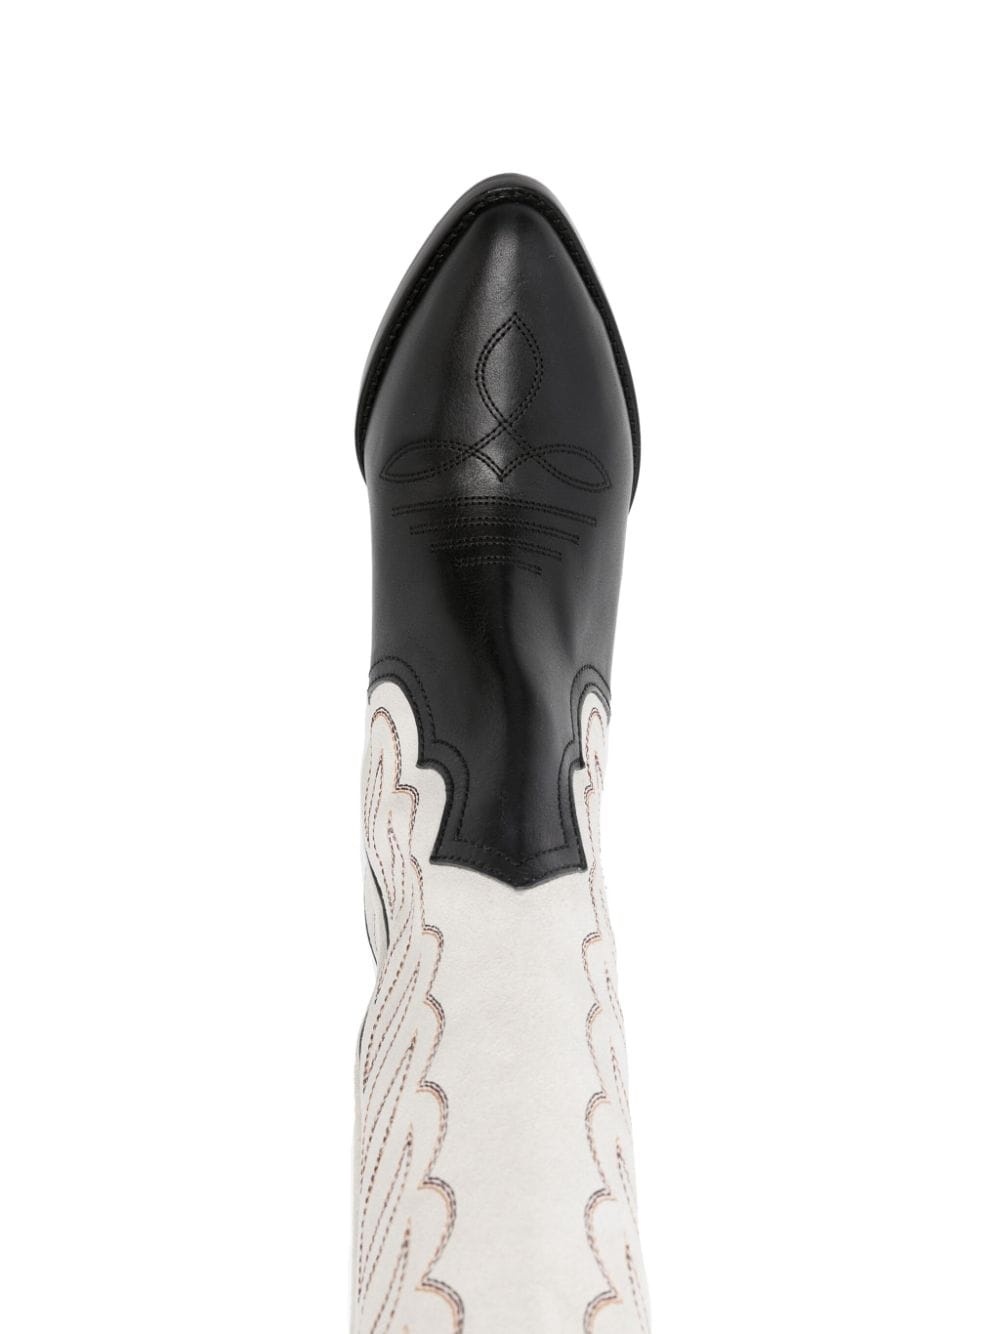 Liela 60mm embroidered leather boots - 4